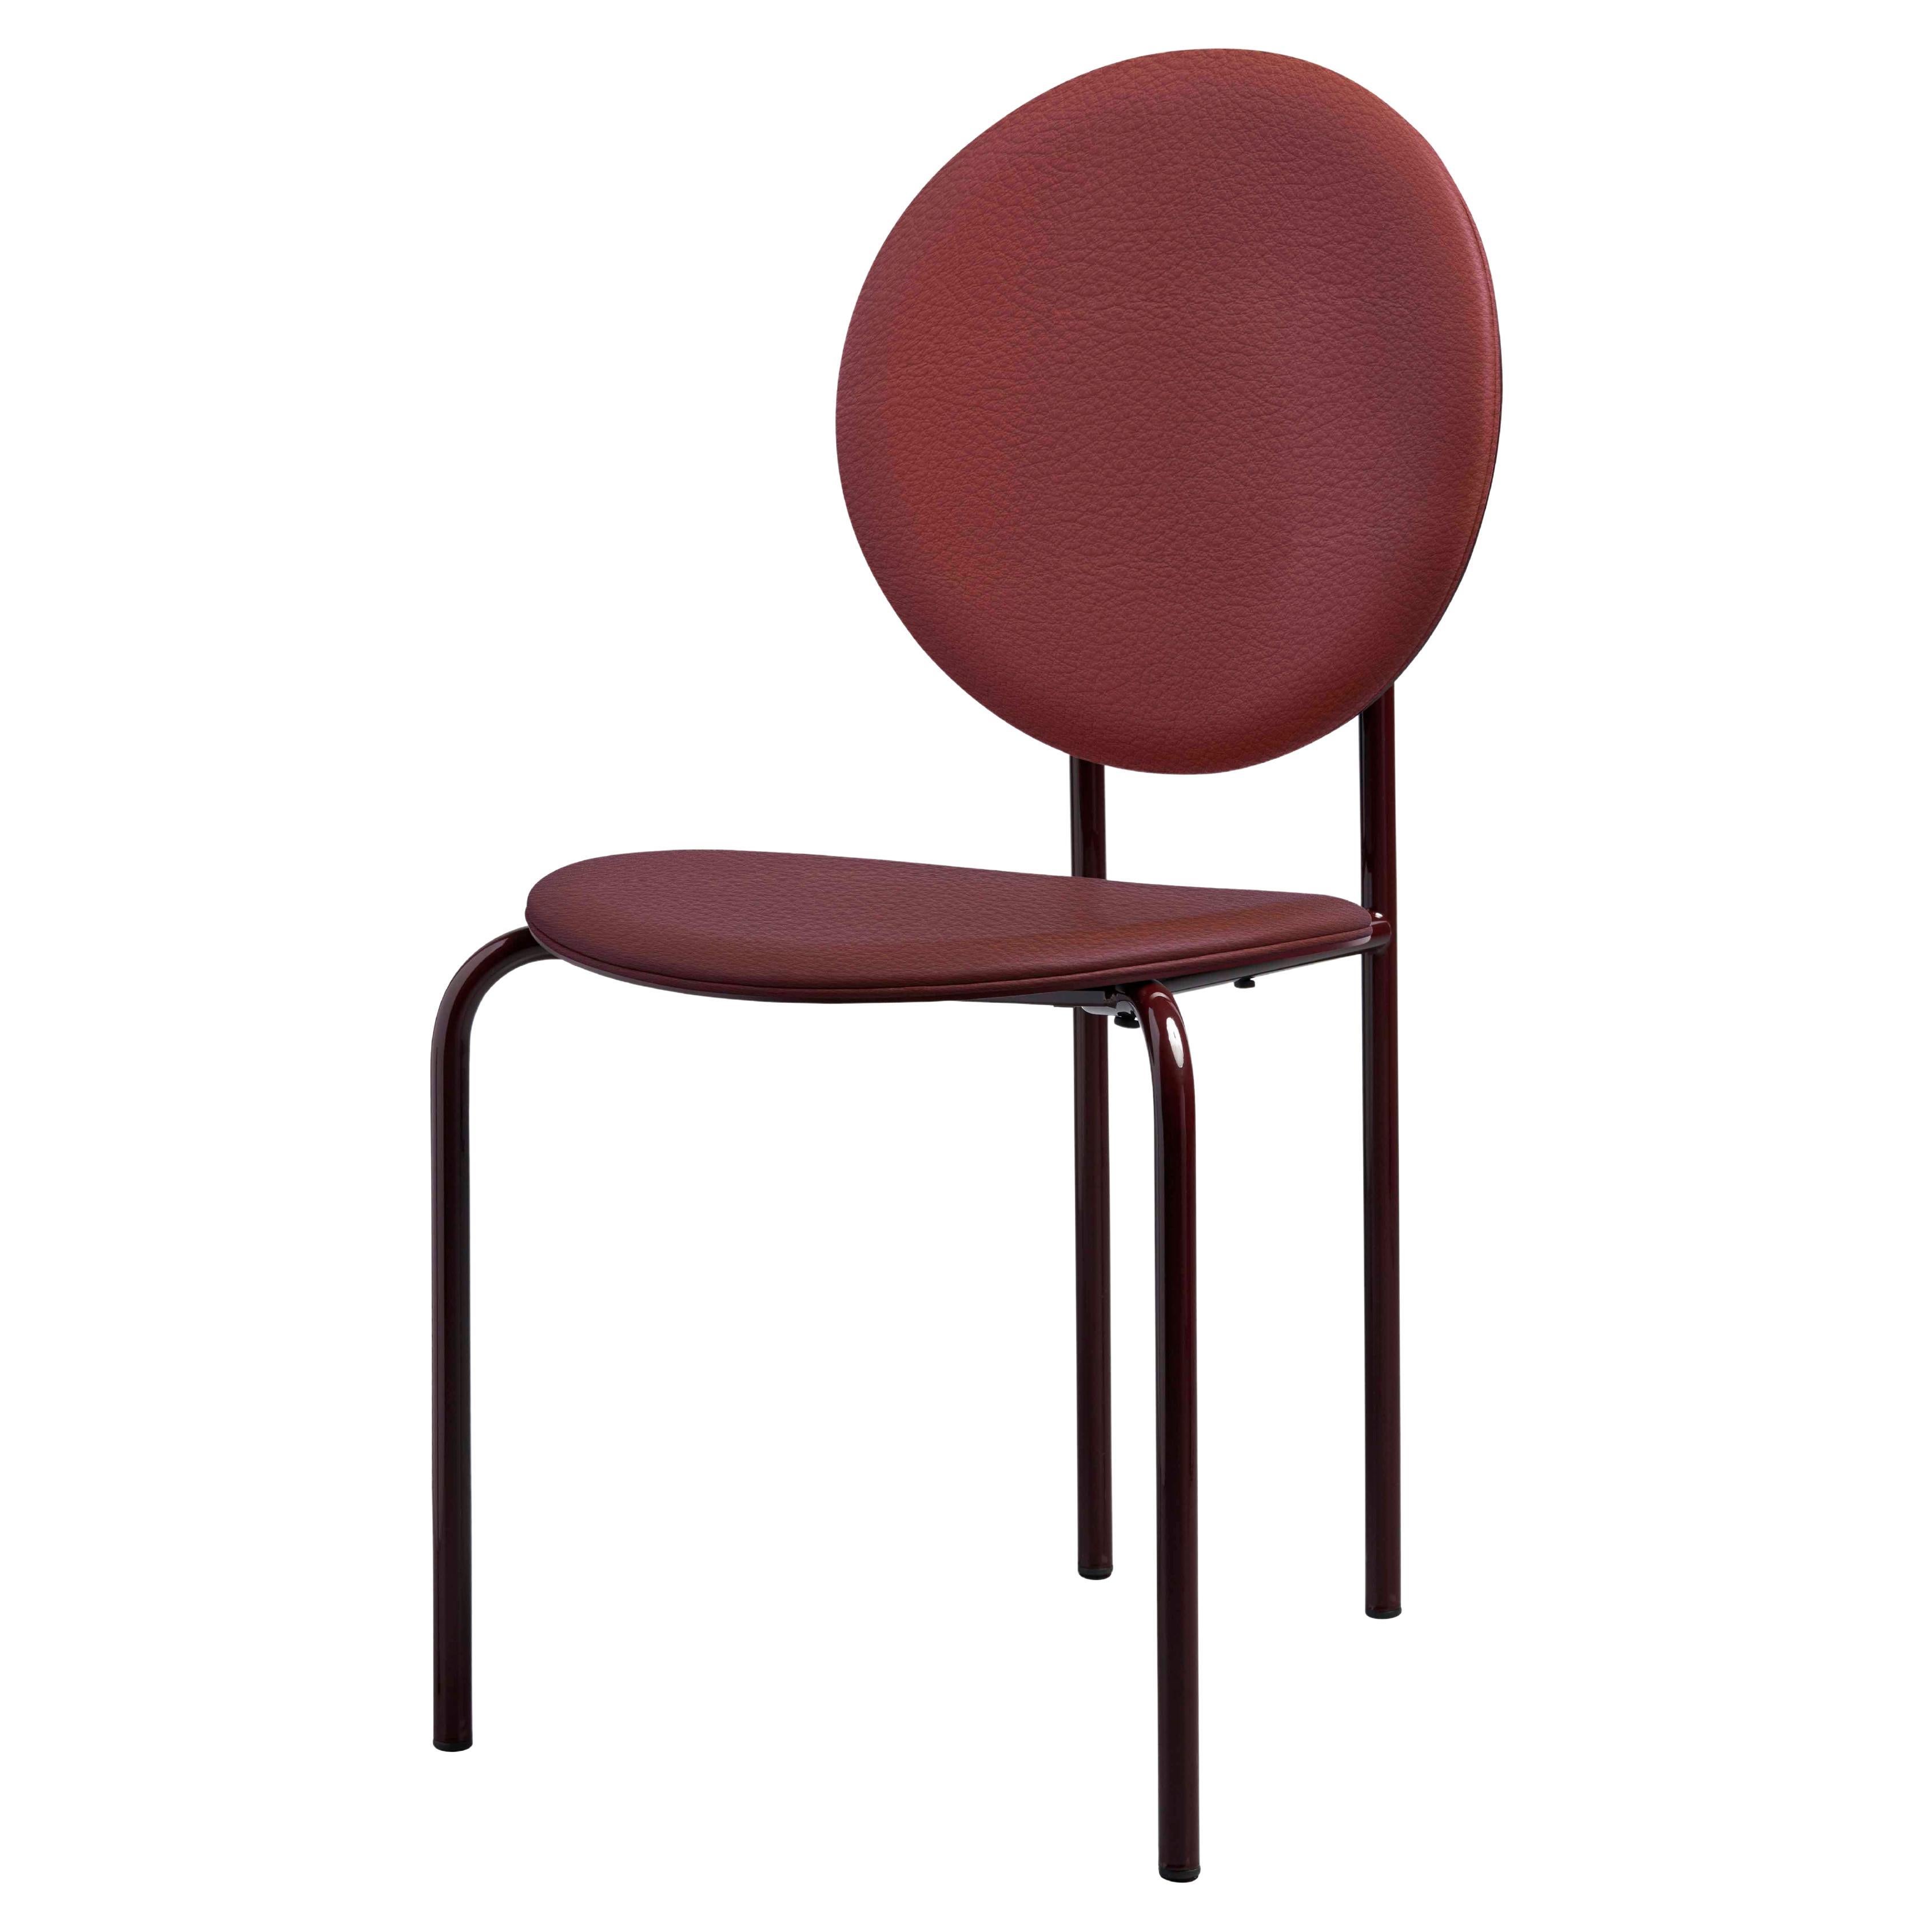 SP01 Michelle Chair in Edinburgh Oxblood Leather, Made in Italy